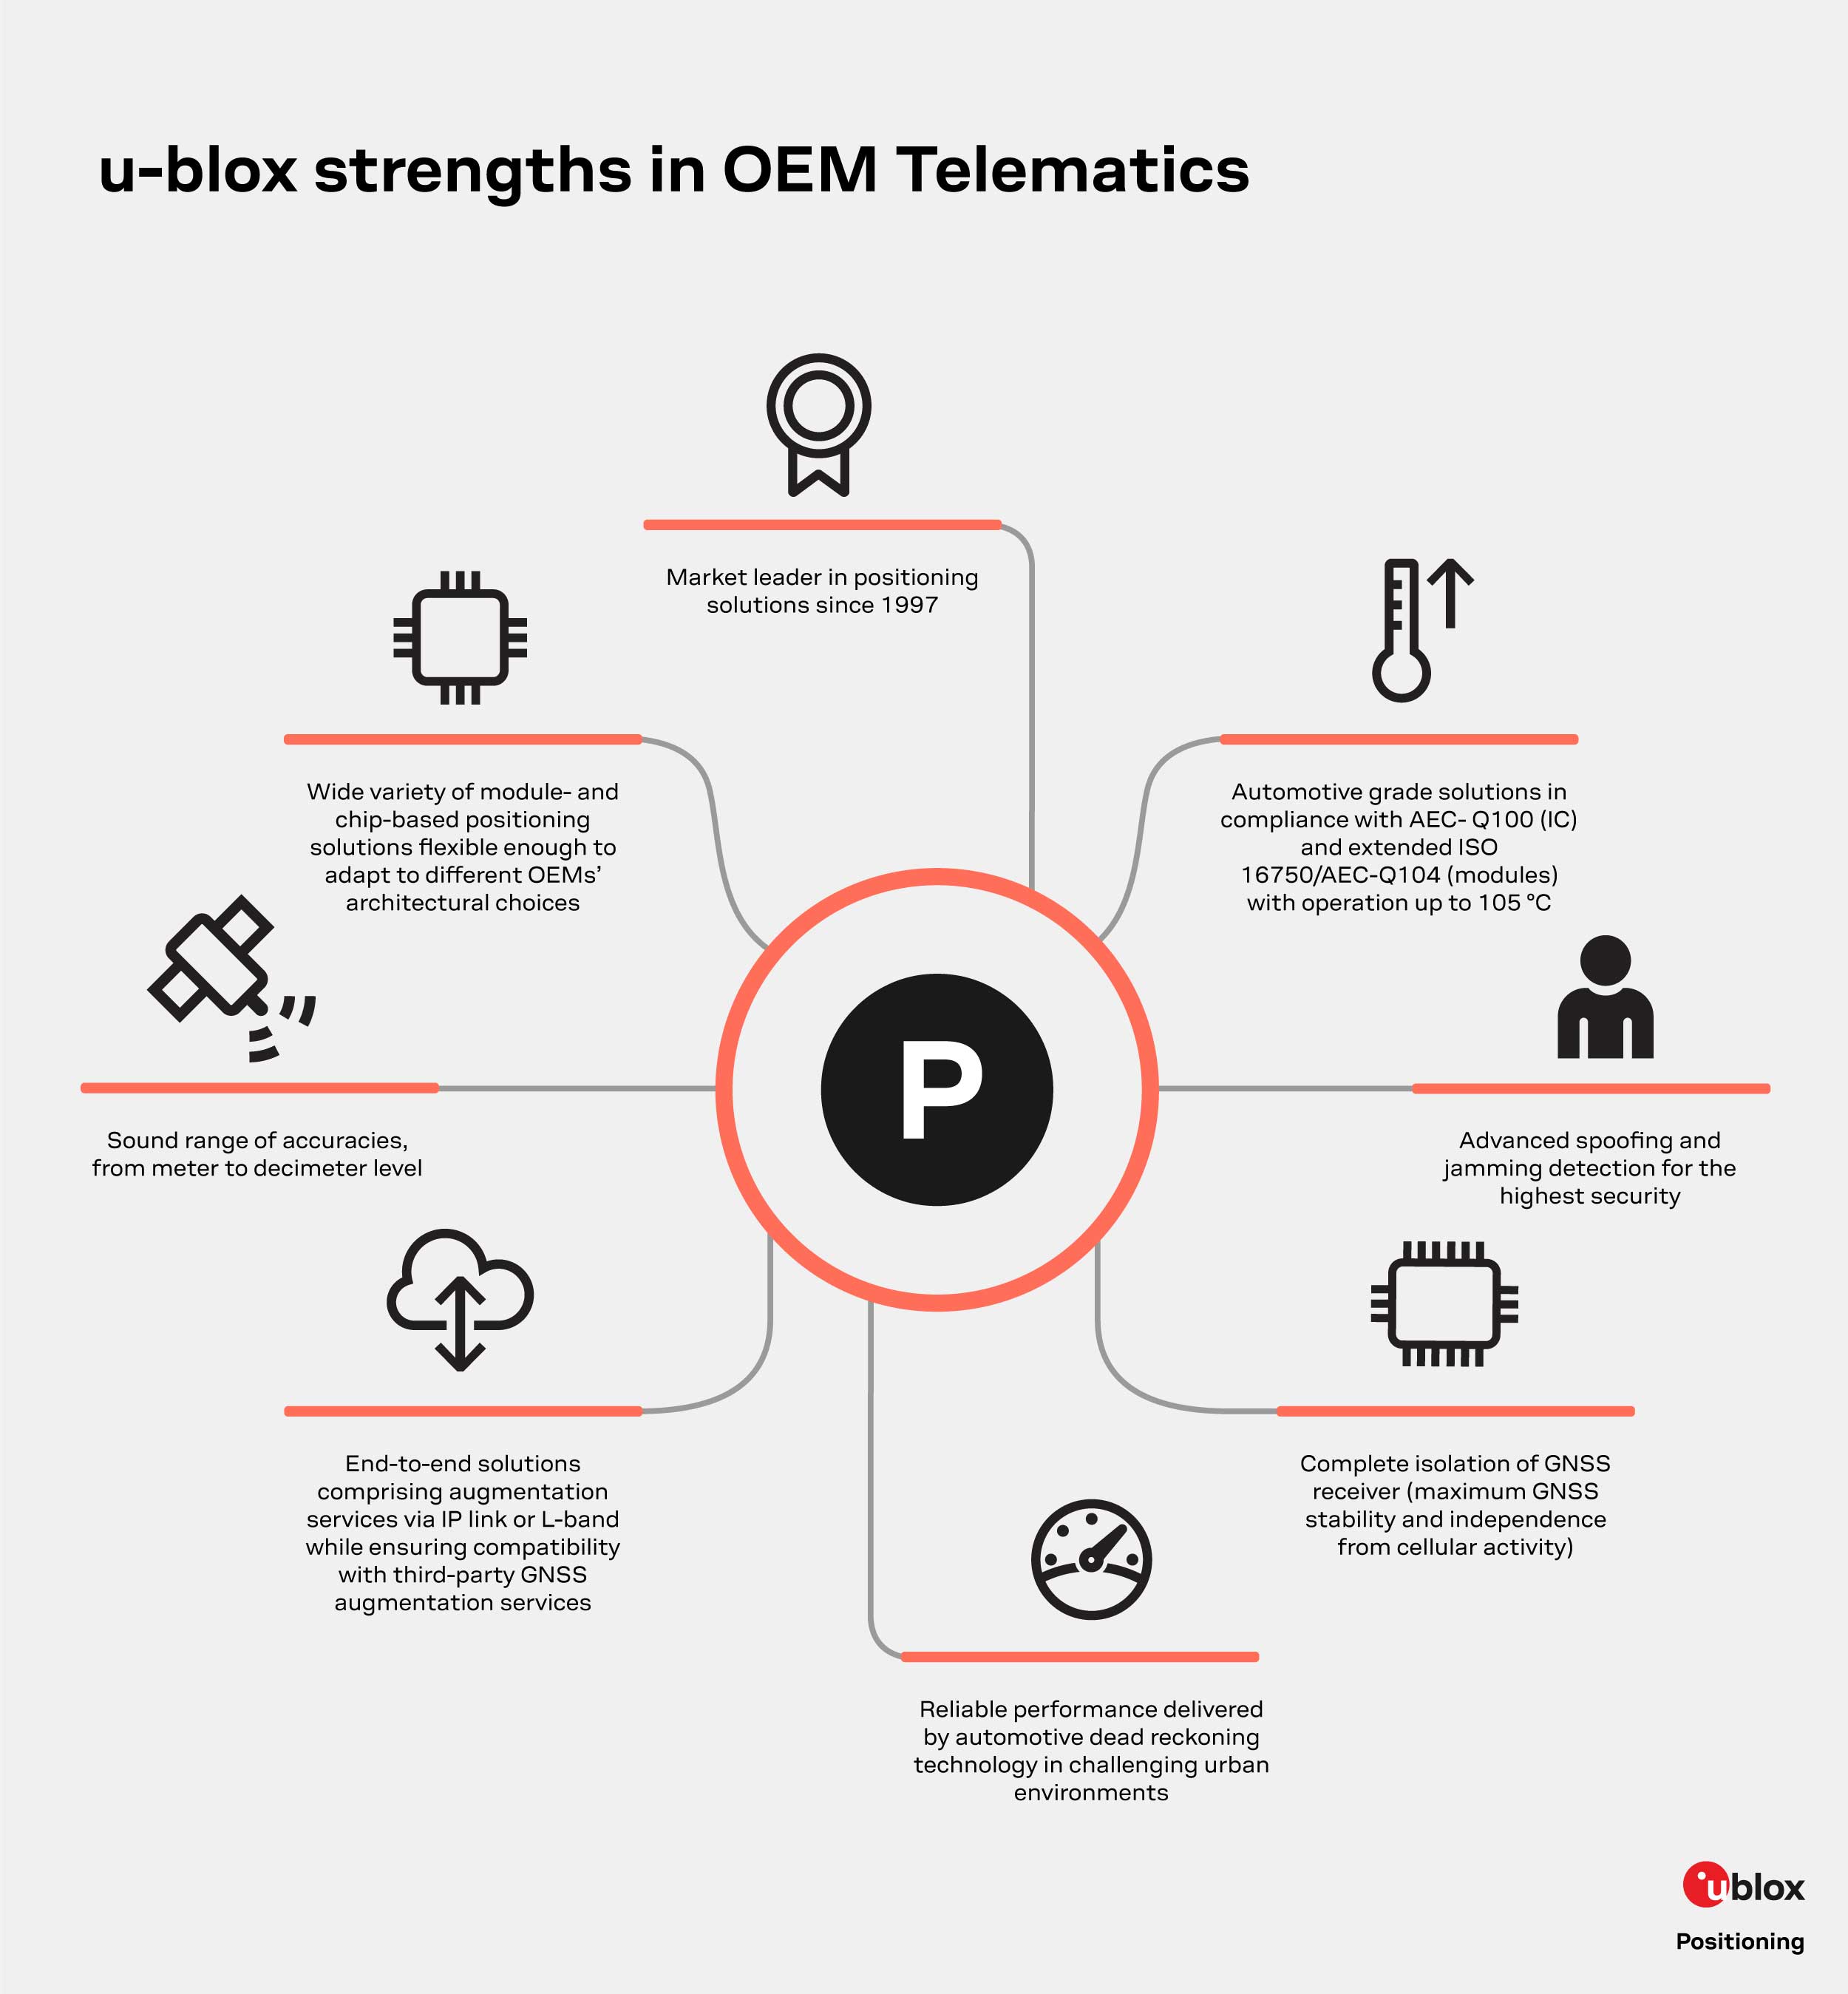 infographics presenting u-blox strengths in om telematics for positioning